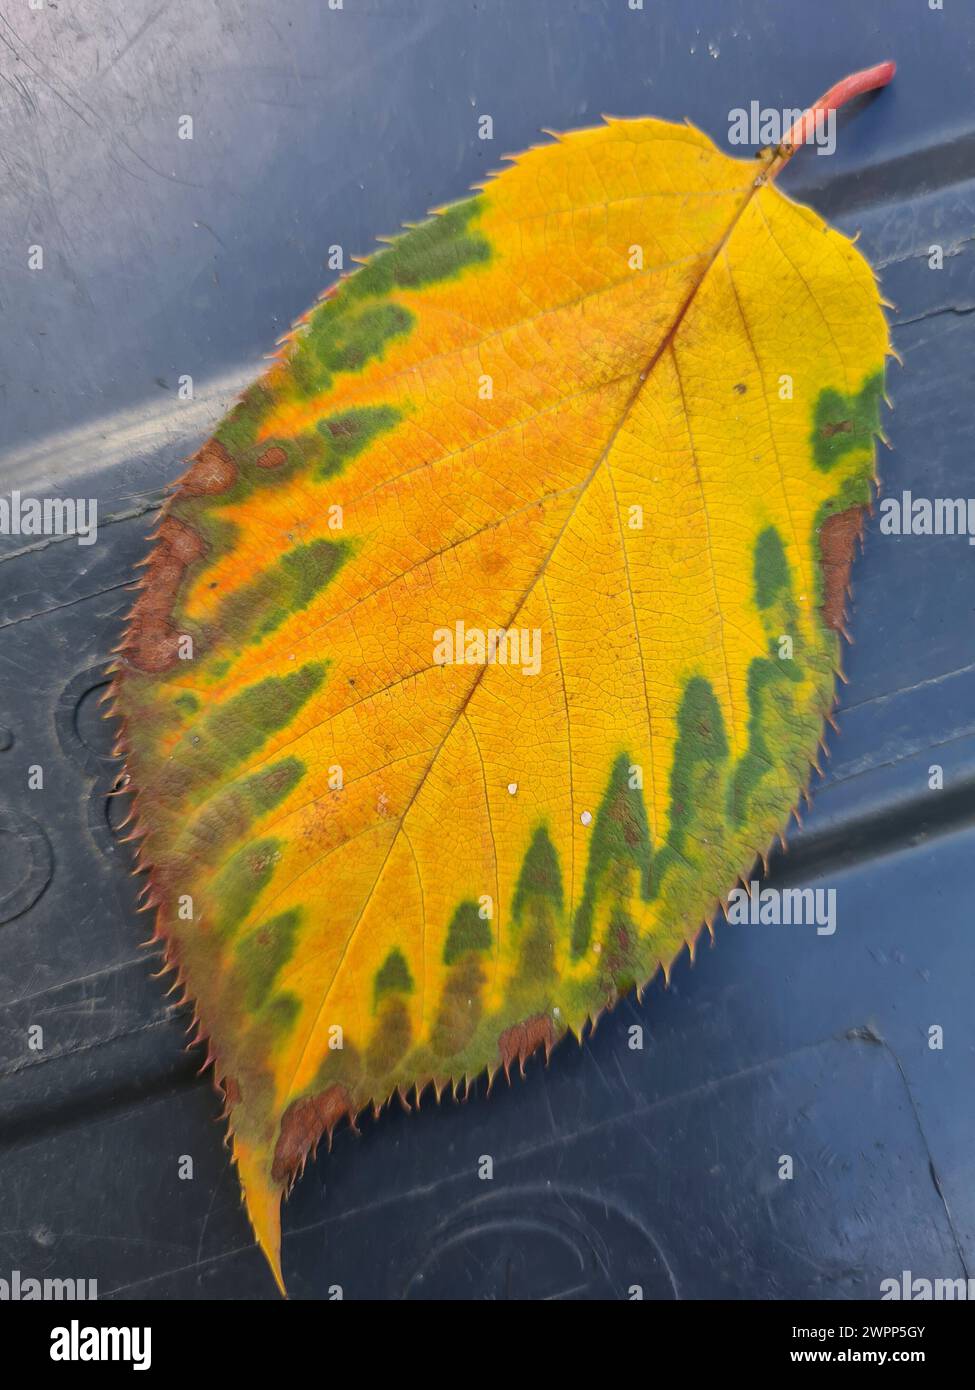 An autumn leaf fallen from a cherry tree with stem and spikes lies on a wooden background Stock Photo